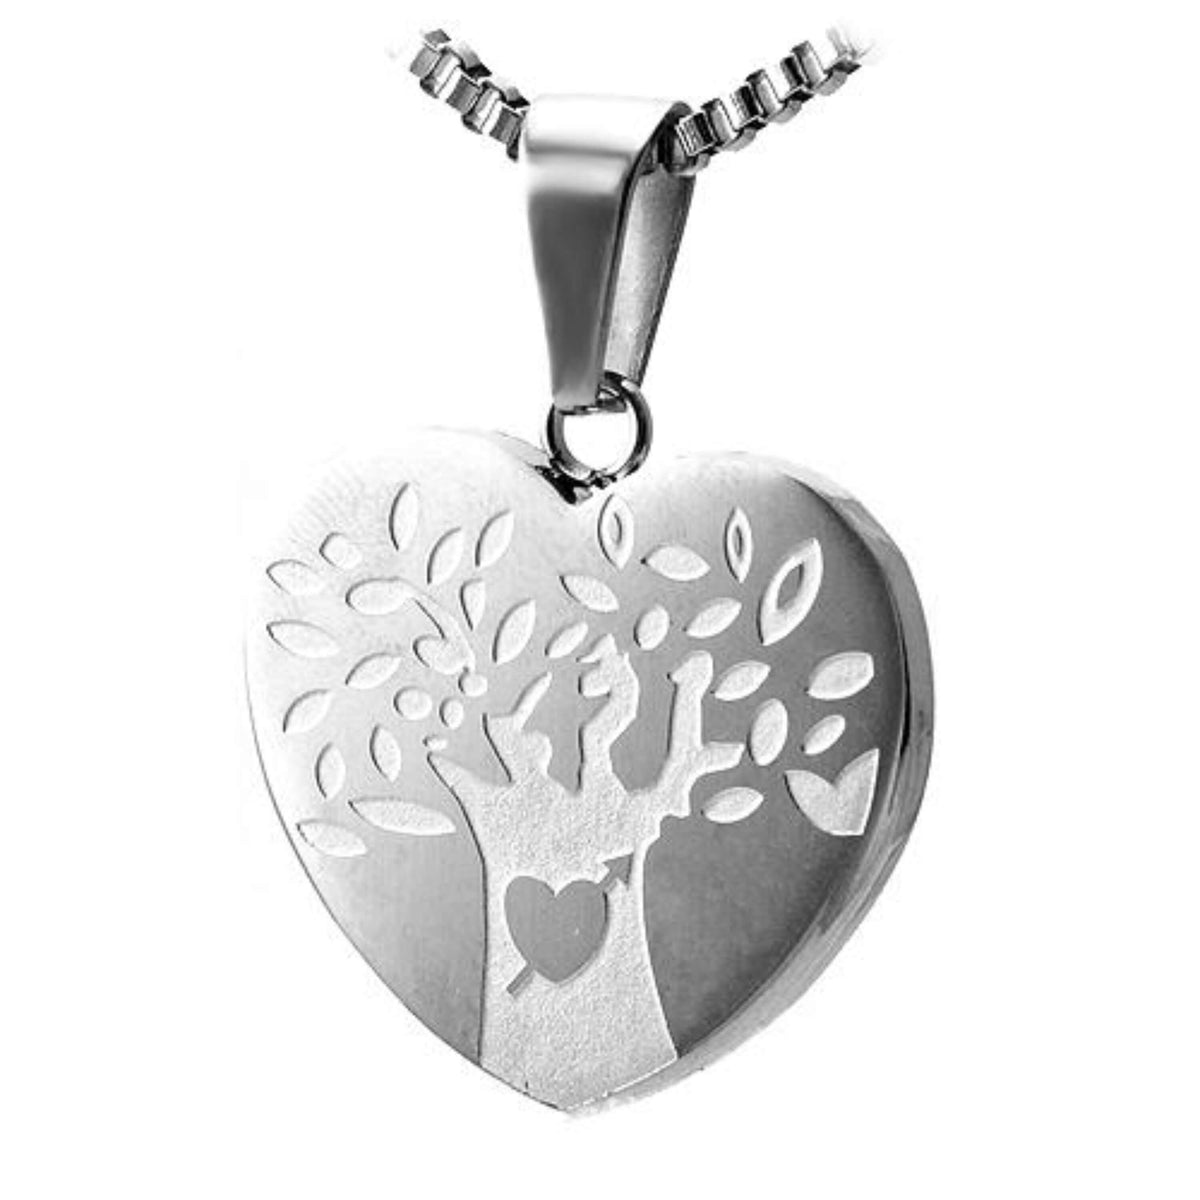 Stainless Steel Heart Pendant with Tree of Life Engraving - The House of Awareness